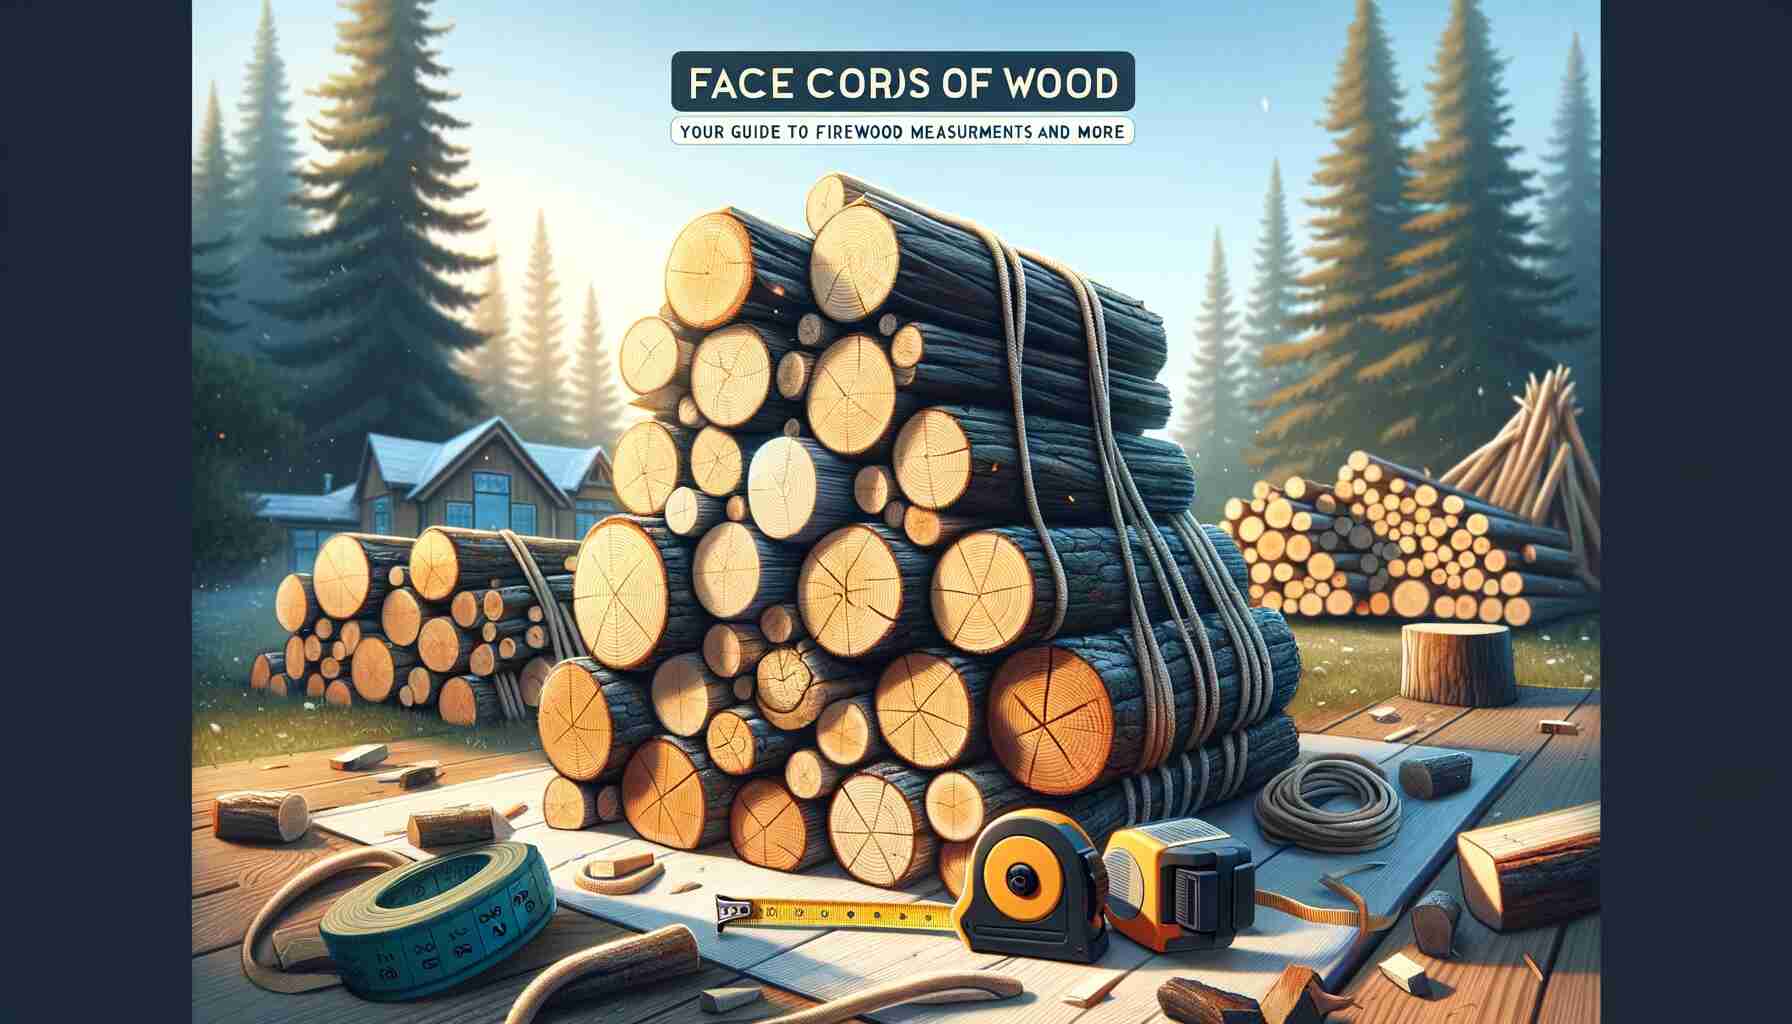 A neatly stacked pile of firewood, showing the face cord clearly, with a measuring tape next to it for scale. The background features an outdoor setting, possibly a forest or backyard. The image has bright, engaging colors, emphasizing outdoor wood storage and measurement. The text ‘Face Cords of Wood: Your Guide to Firewood Measurements and More’ is prominently displayed in a clear, readable font at the top of the image.